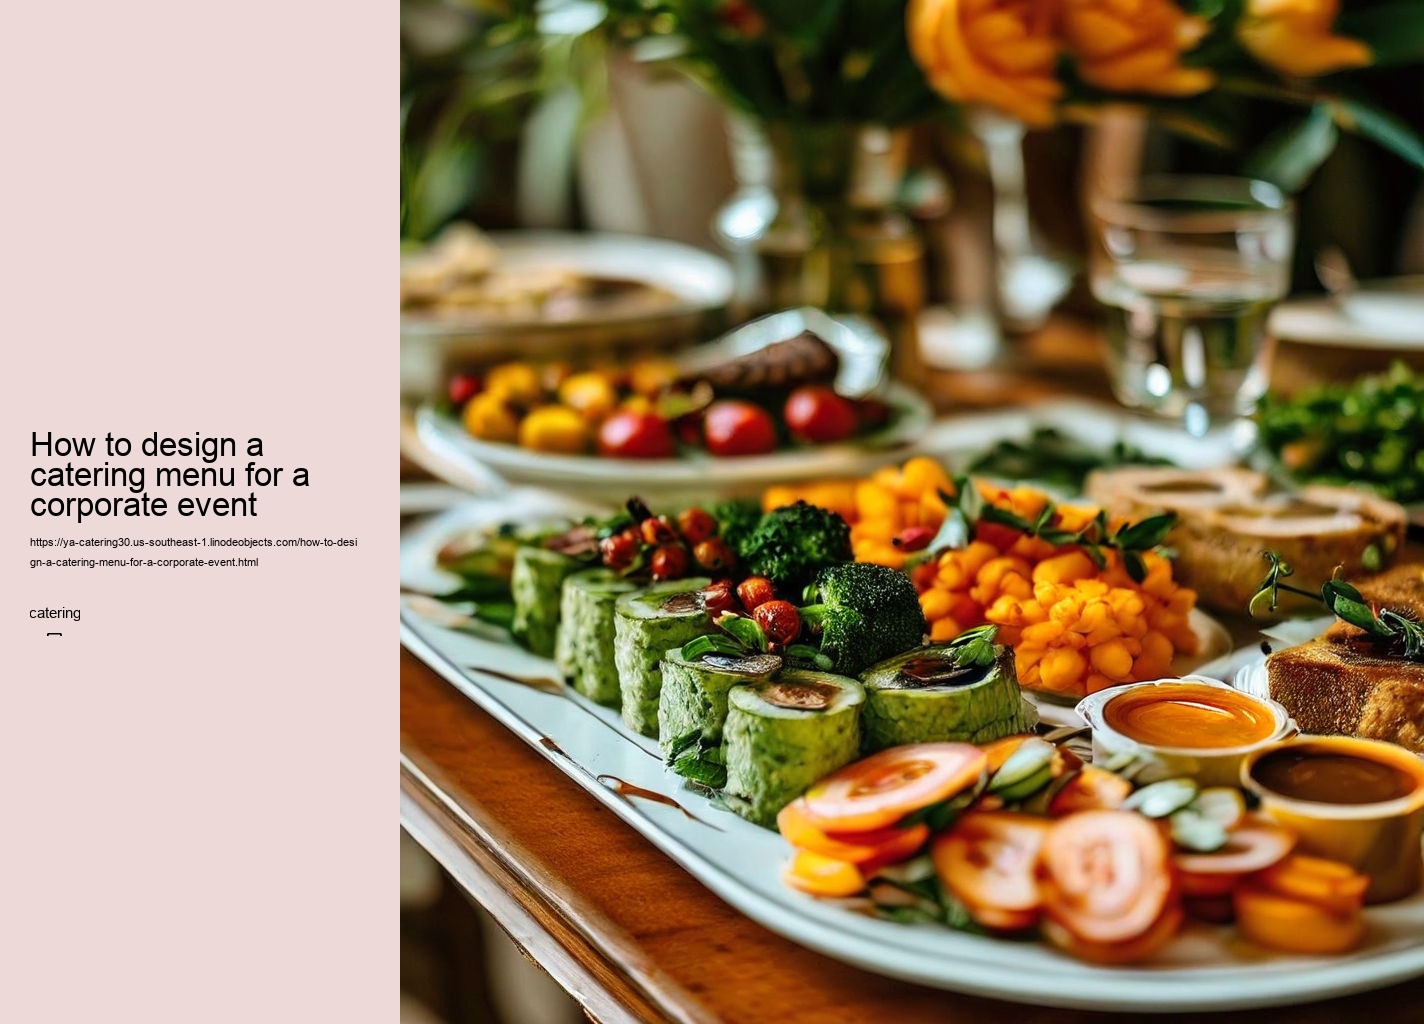 How to design a catering menu for a corporate event